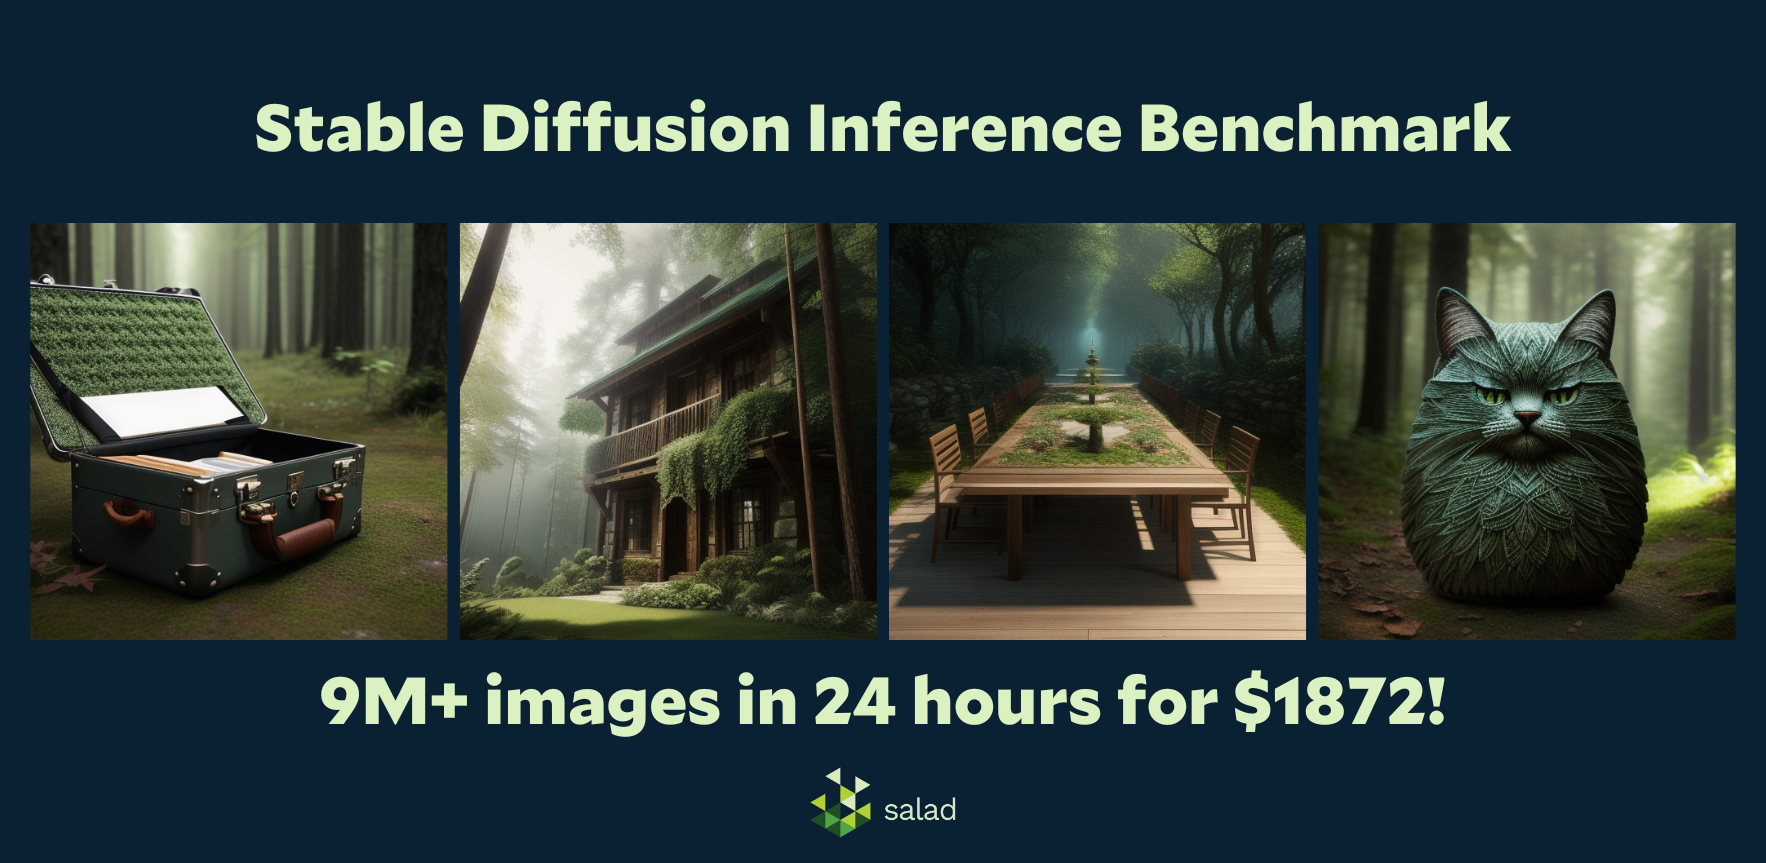 Stable Diffusion Inference Benchmark for consumer-grade GPUs